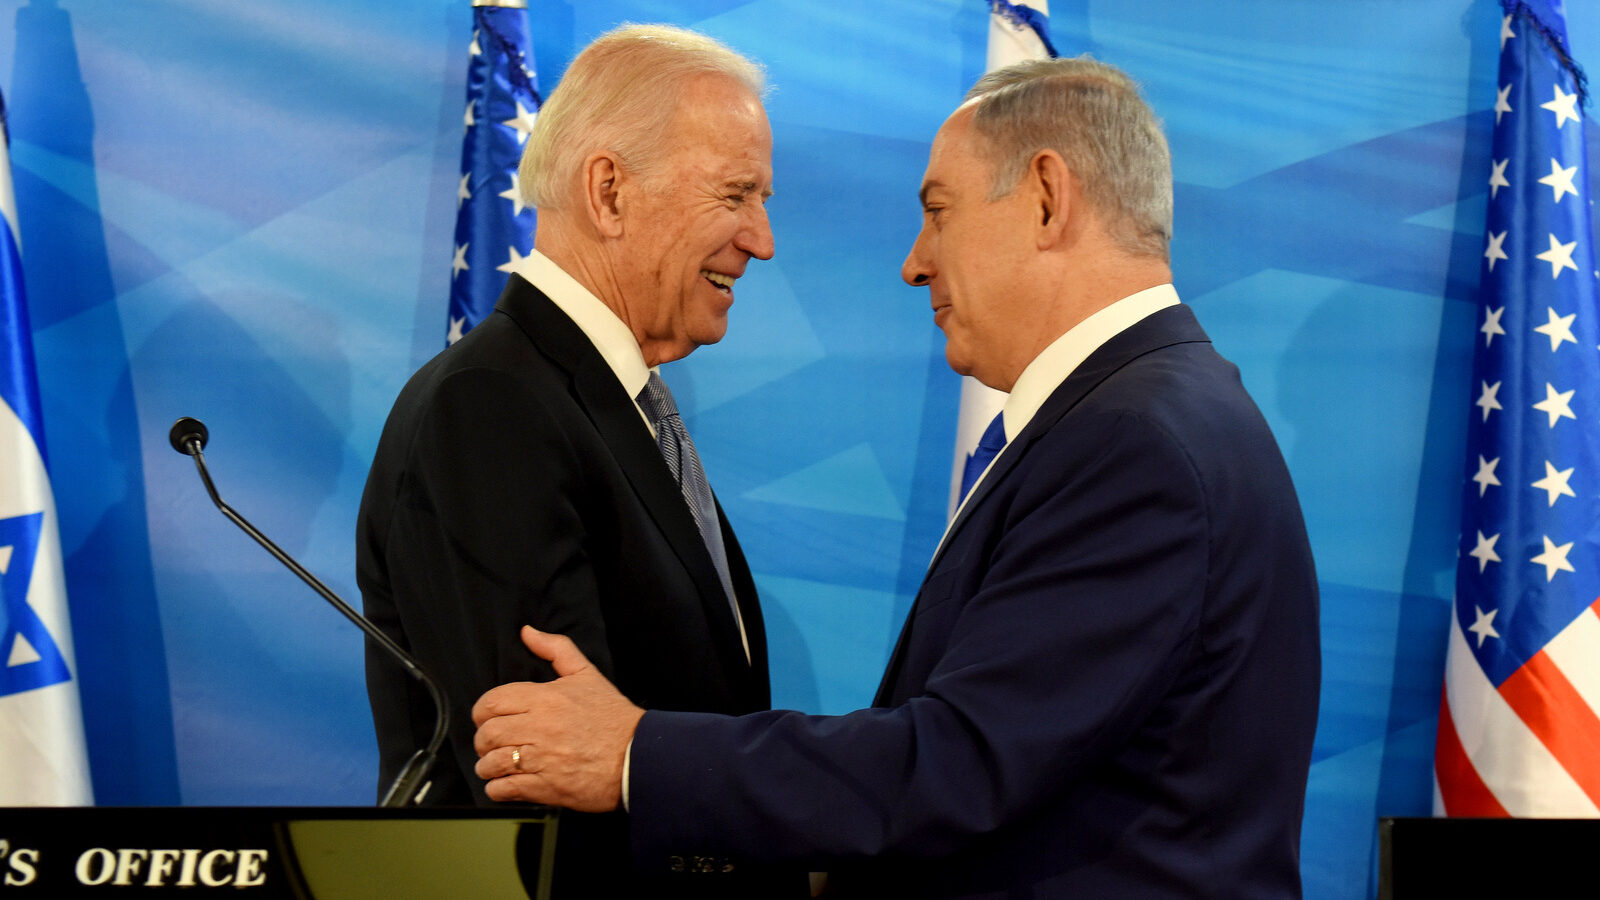 US Vice President Joe Biden and Israeli Prime Minister Benjamin Netanyahu shake hands while giving joint statements in the prime minister's office in Jerusalem, Israel, Wednesday, March 9, 2016. (Debbie Hill, Pool via AP)